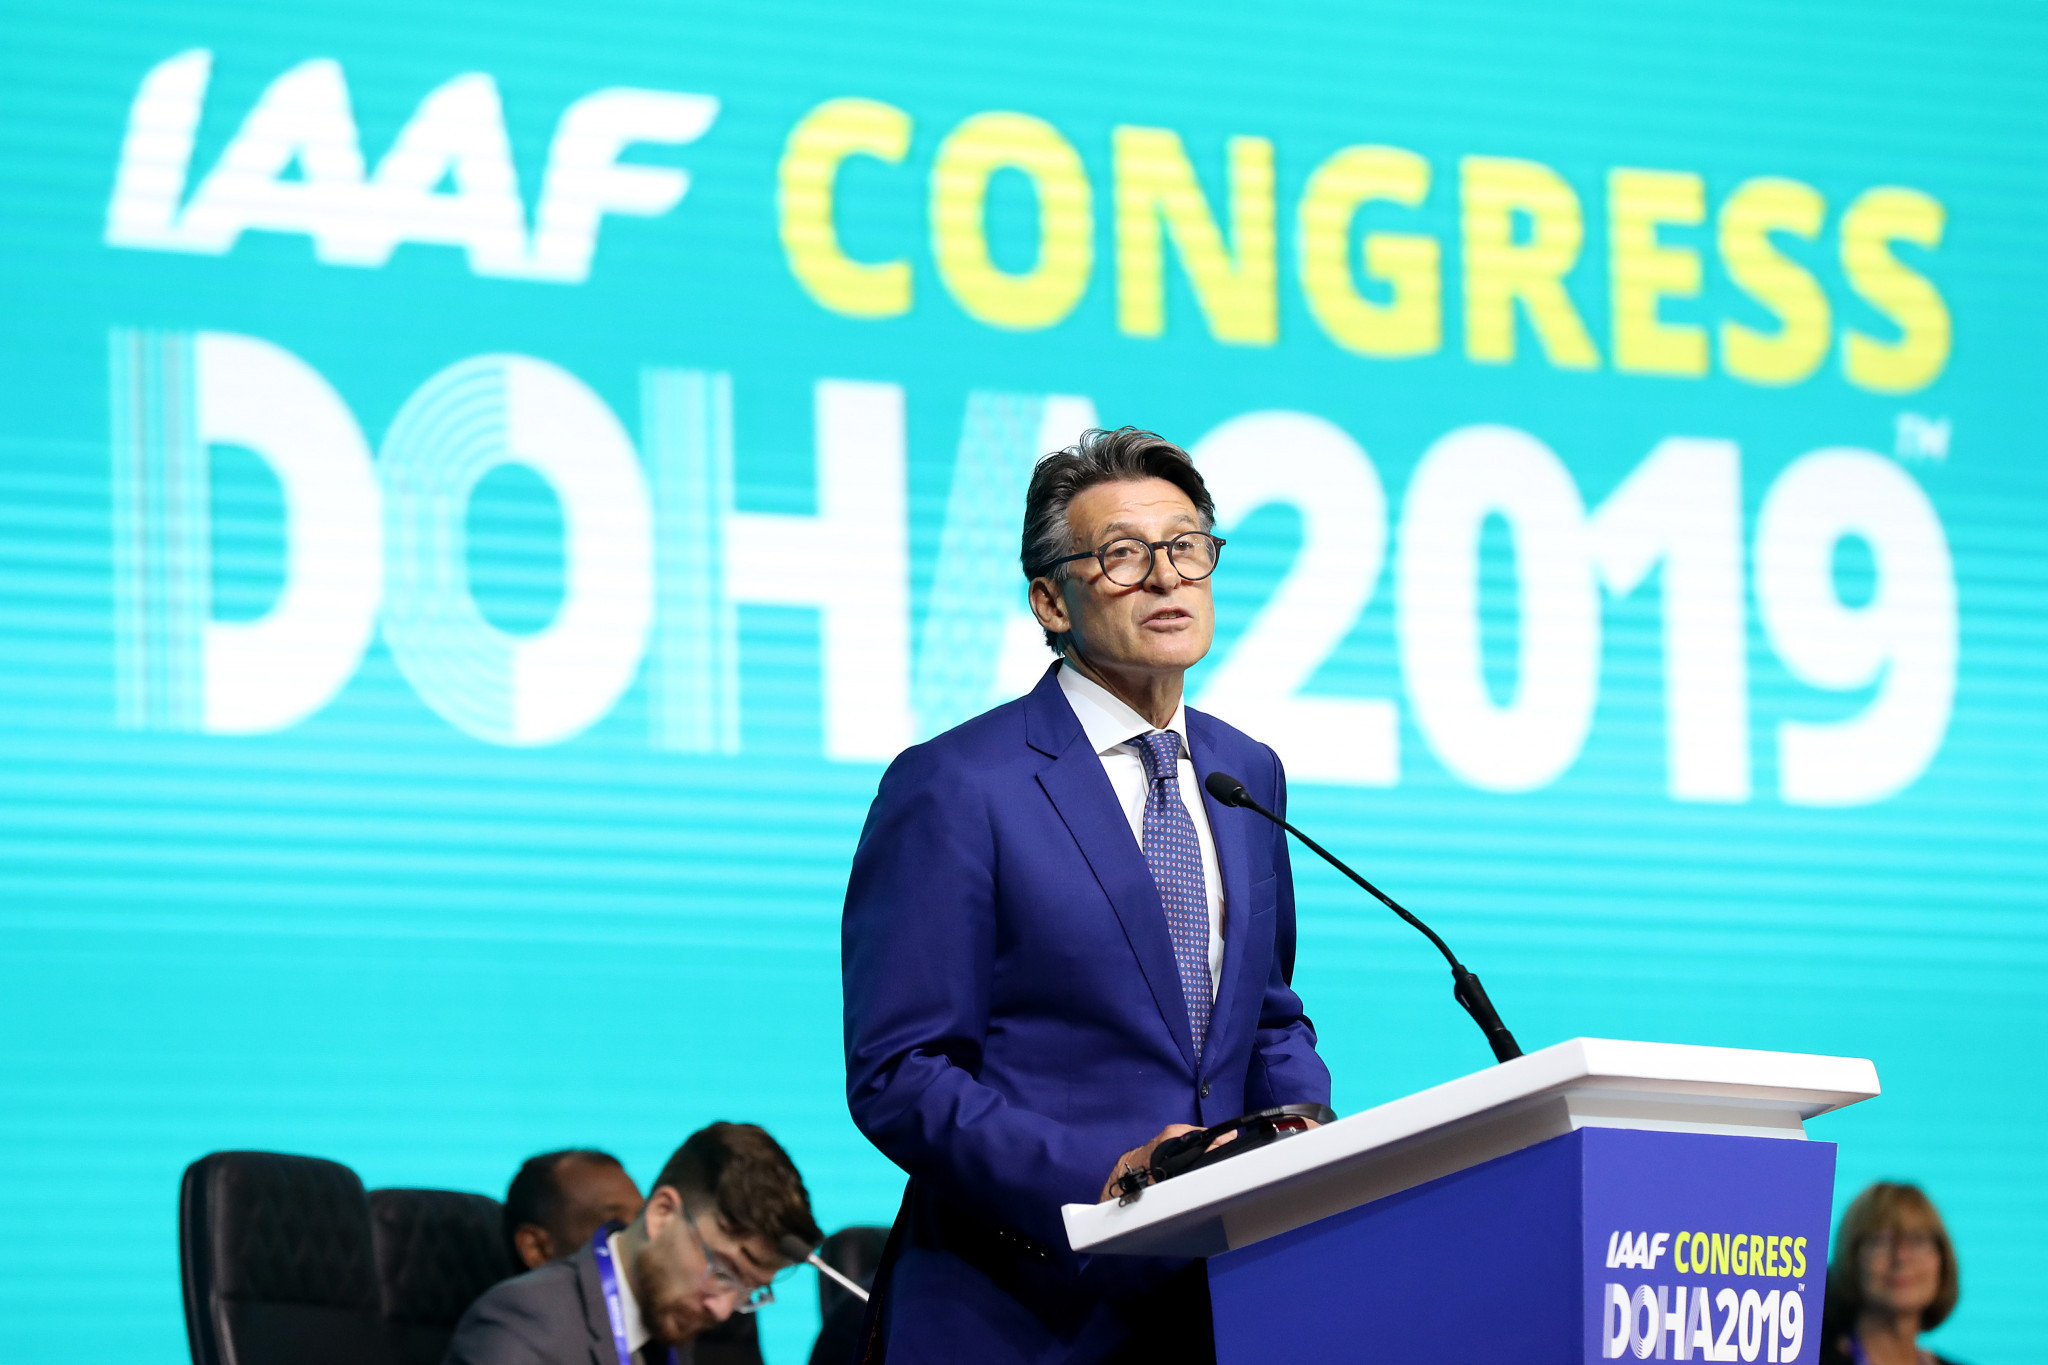 Sebastian Coe re-elected for second term as IAAF President on historic day for sport